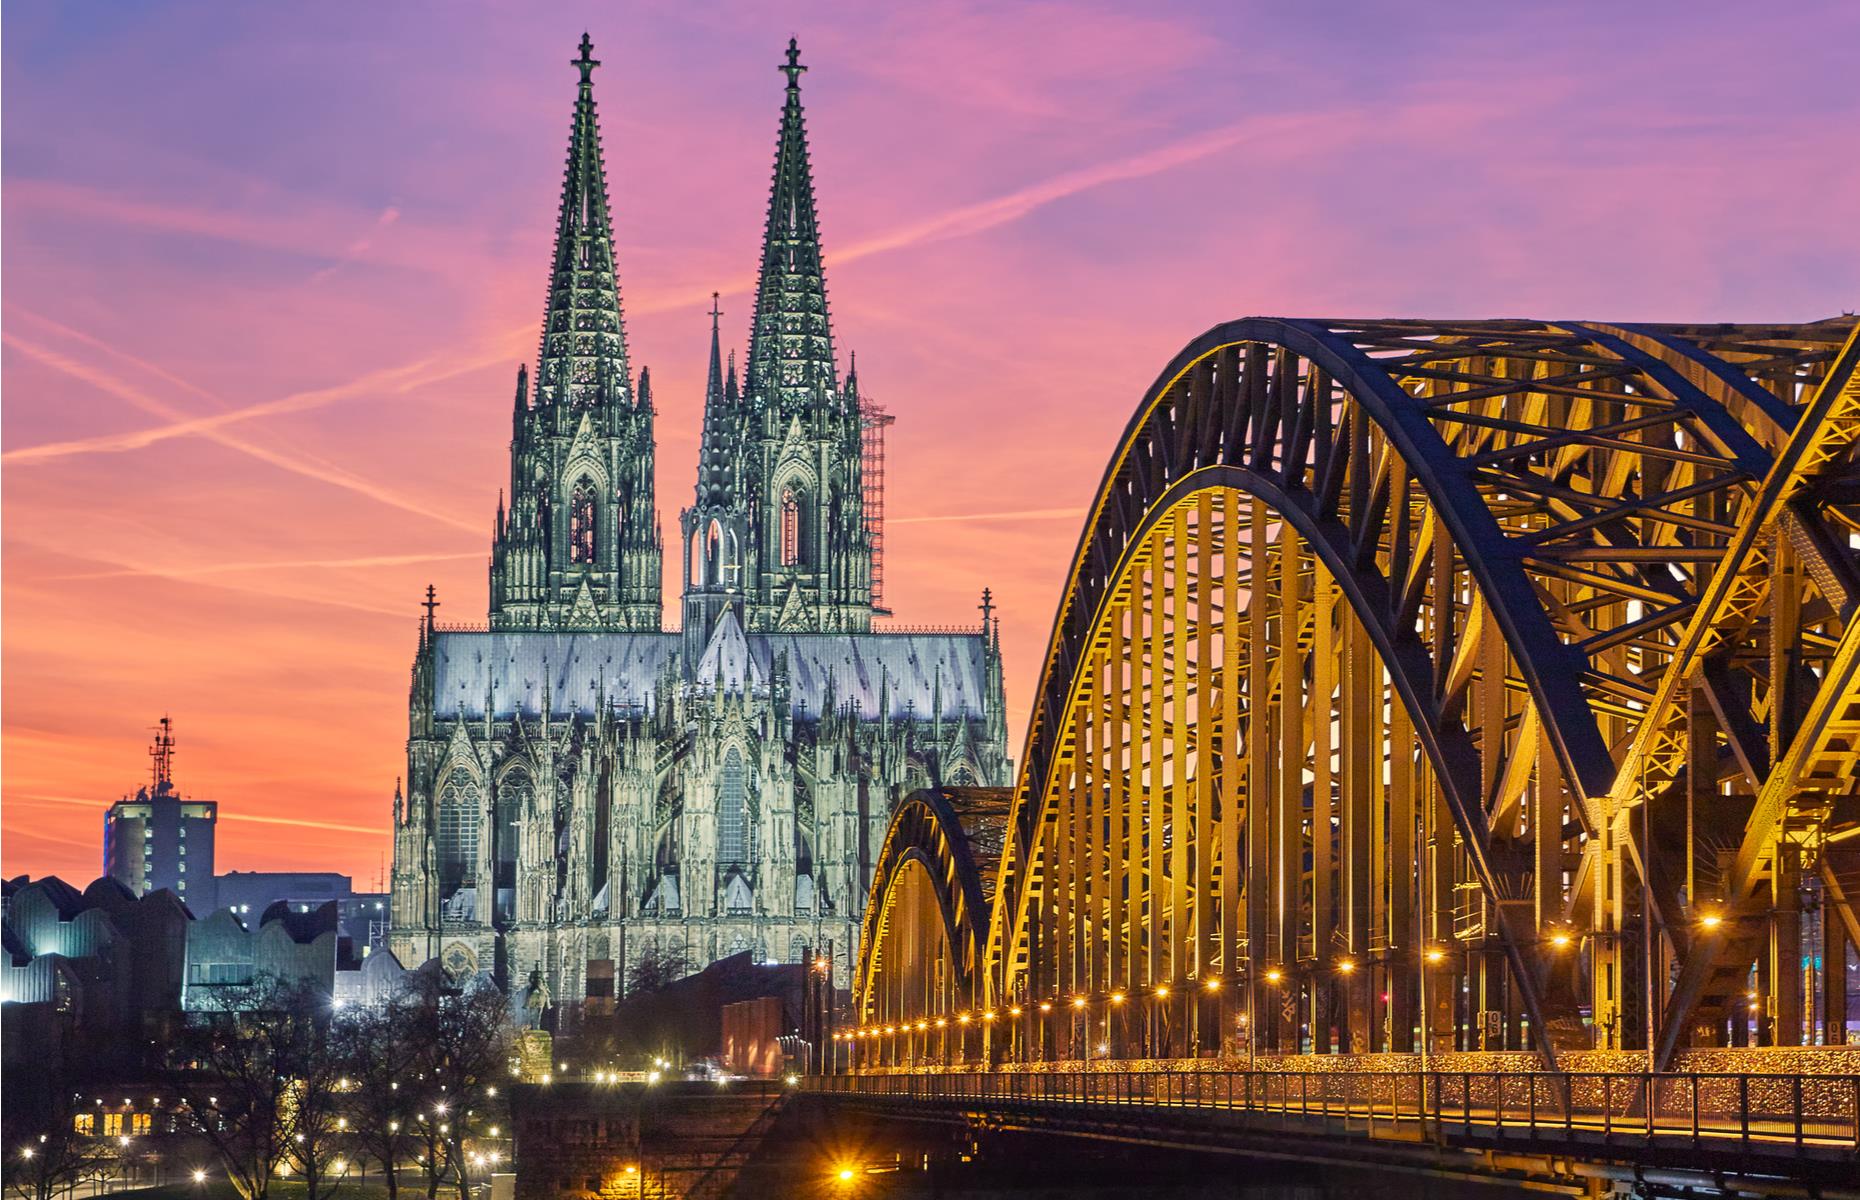 <p>It took successive armies of builders more than 600 years to complete this Gothic masterpiece, which is the most recognizable and iconic landmark of the city by the Rhine. Construction of <a href="https://whc.unesco.org/en/list/292/">Cologne Cathedral</a> began in 1248 and, though it wasn’t completed until 1880, the final result was remarkably faithful to the original medieval plans. The grandeur of the five-sided basilica is equaled only by the contents, which includes statues, stained-glass windows and a shrine to the Three Wise Men.</p>